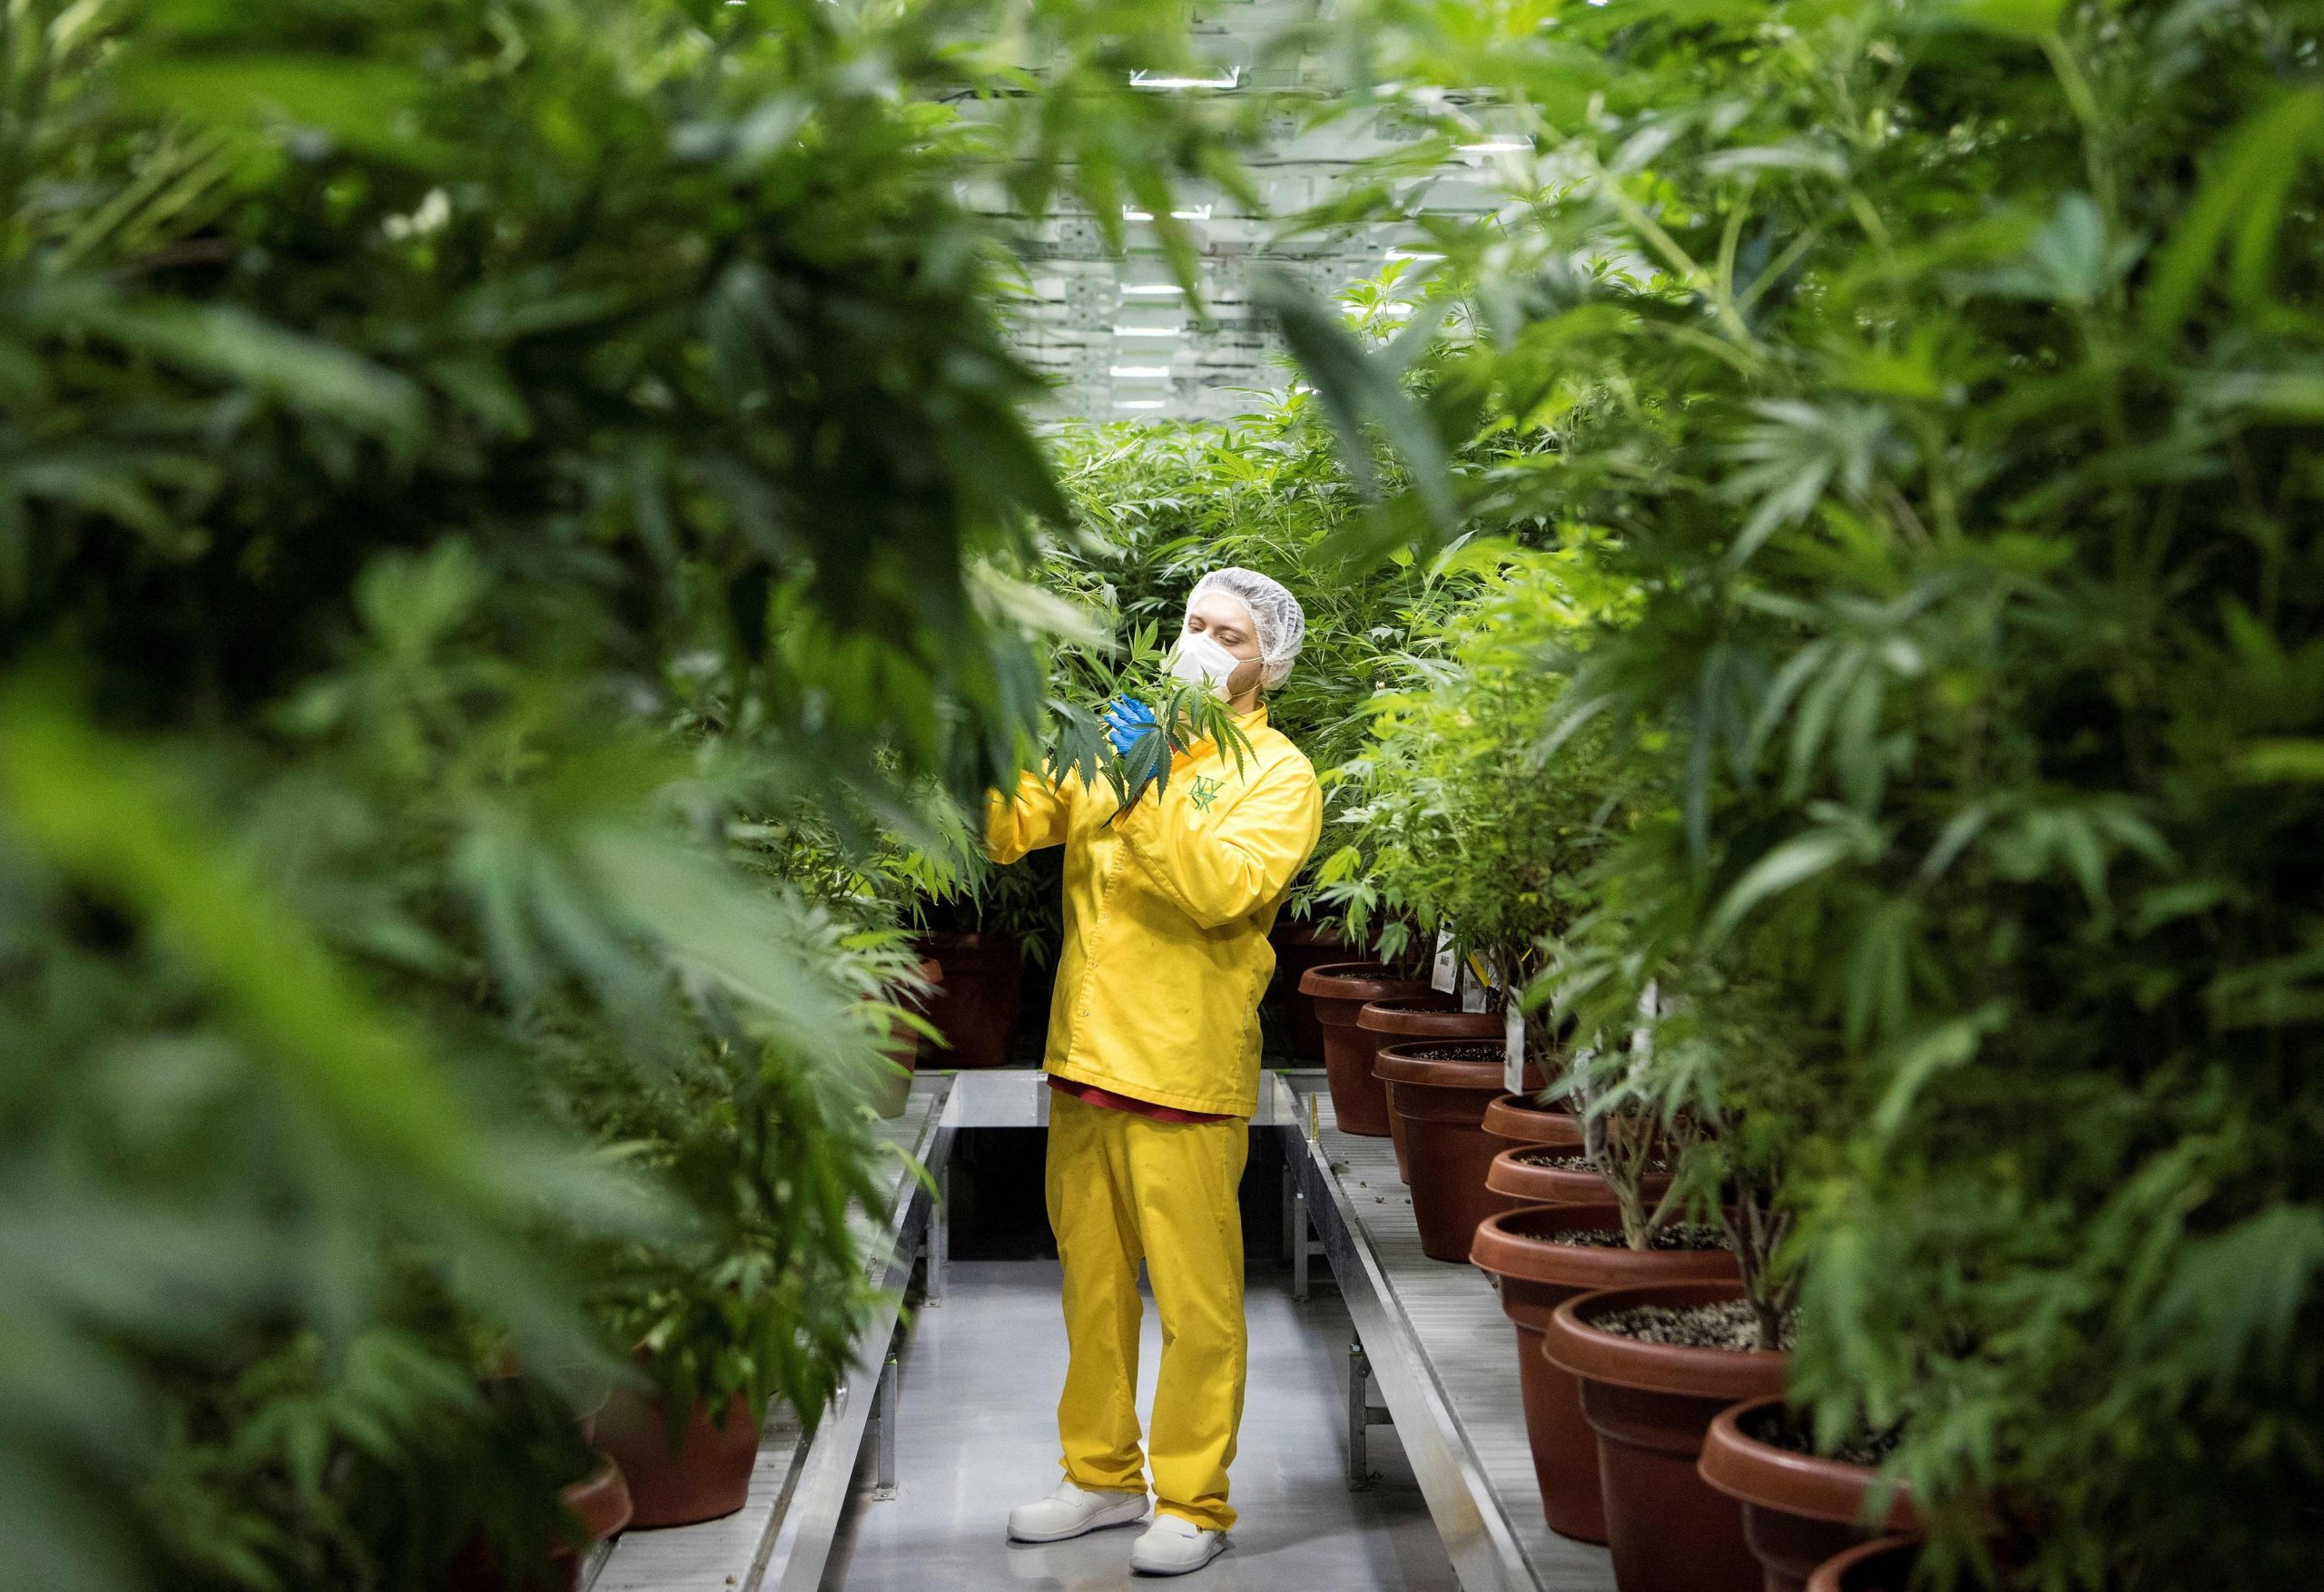 A worker inspects medicinal cannabis plants at a medical cannabis farm near Skopje, Macedonia. The country is trying to be a cannabis pioneer in Europe, with the government promising a public debate on legalising marijuana and turning the country into the Amsterdam of the Balkans